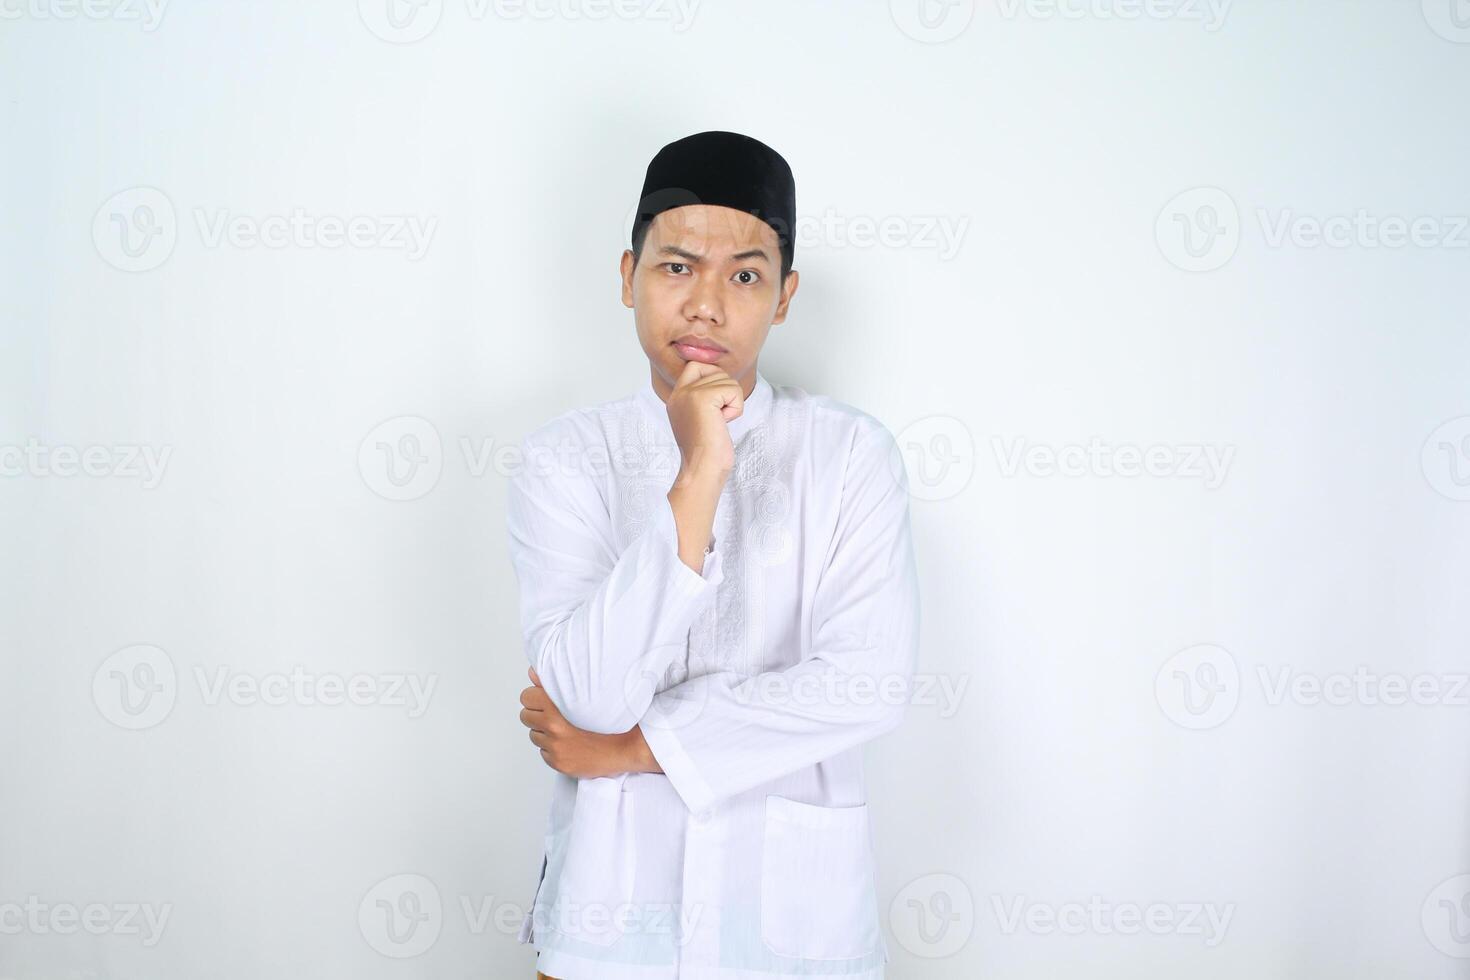 muslim man asian looking at camera with hand on chin to think about something isolated on white background photo